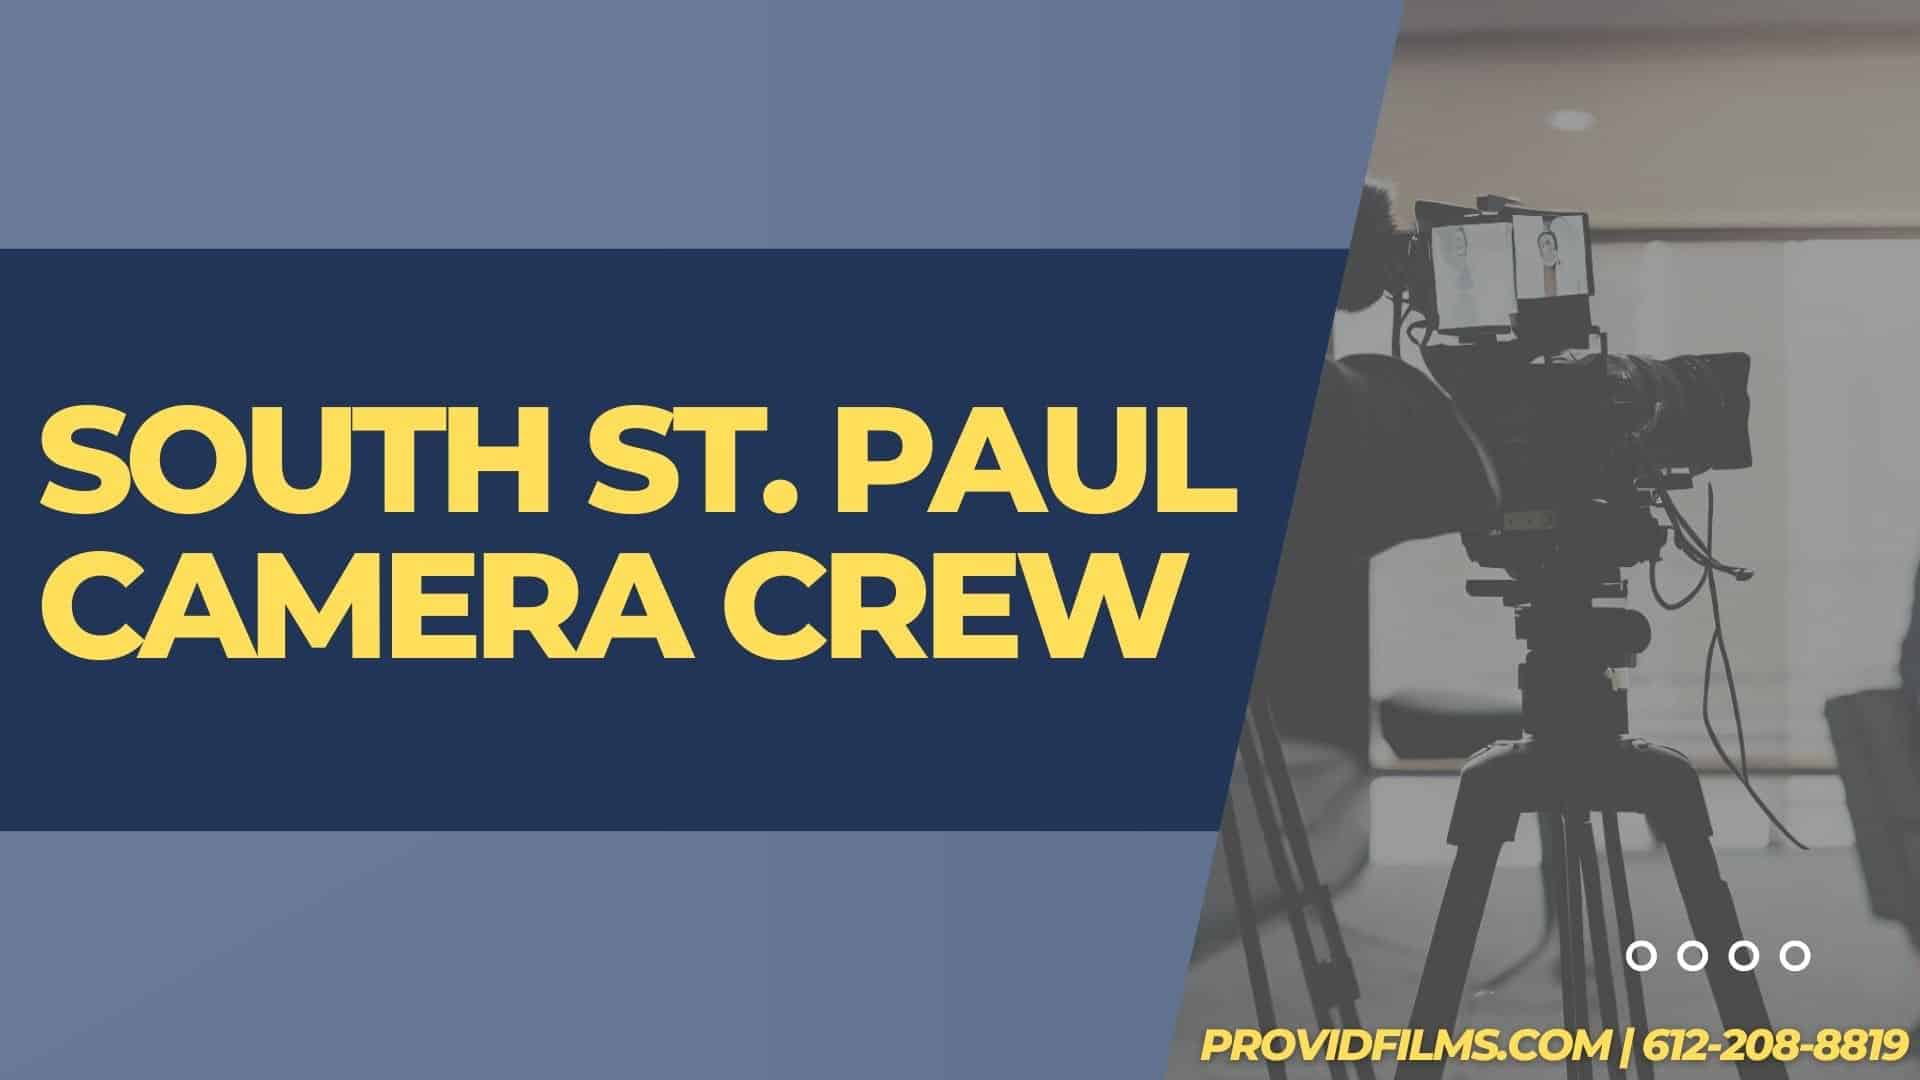 Graphic of a video camera with the text saying "South St. Paul Camera Crew"